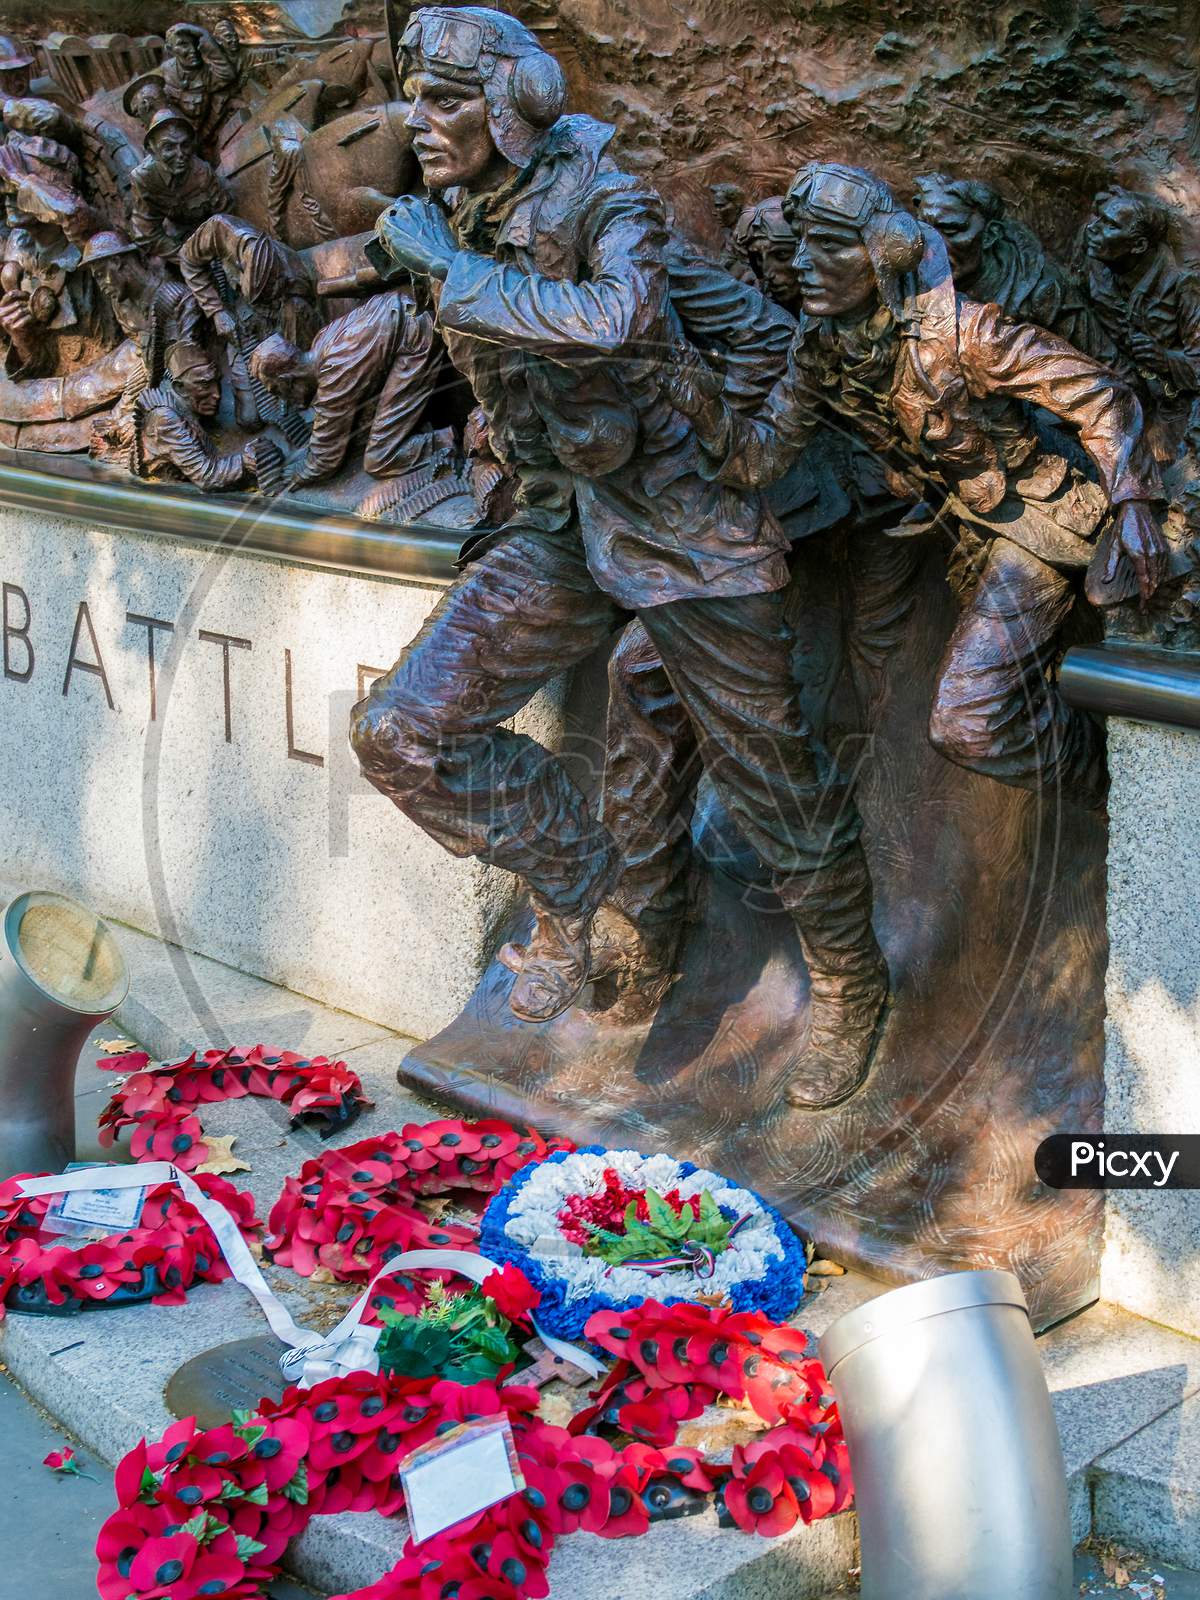 Close-Up Of Part Of The Battle Of Britain War Memorial